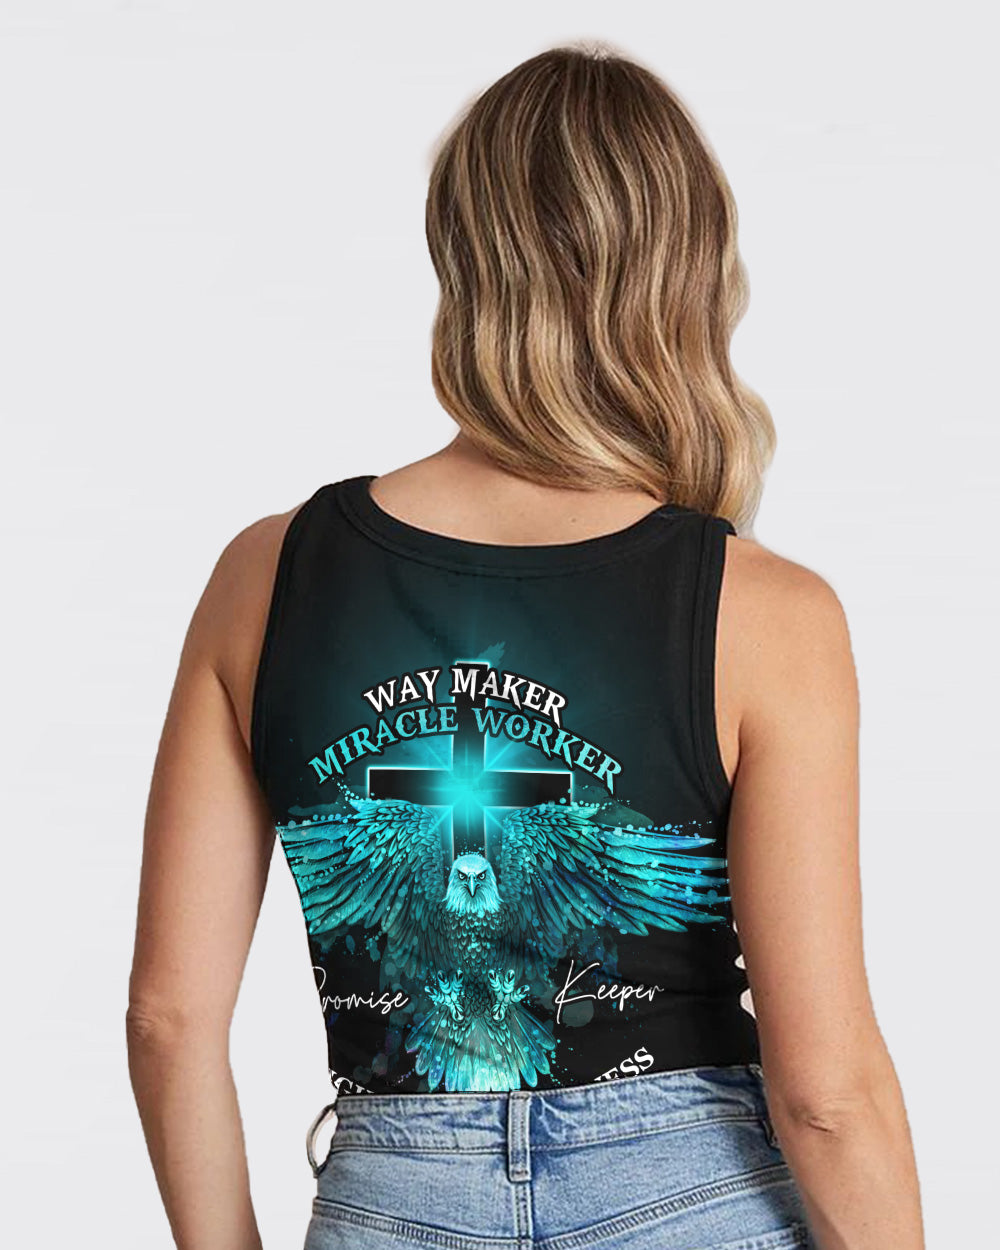 Way Maker Miracle Worker Teal Eagle Cross Women's Christian Tanks